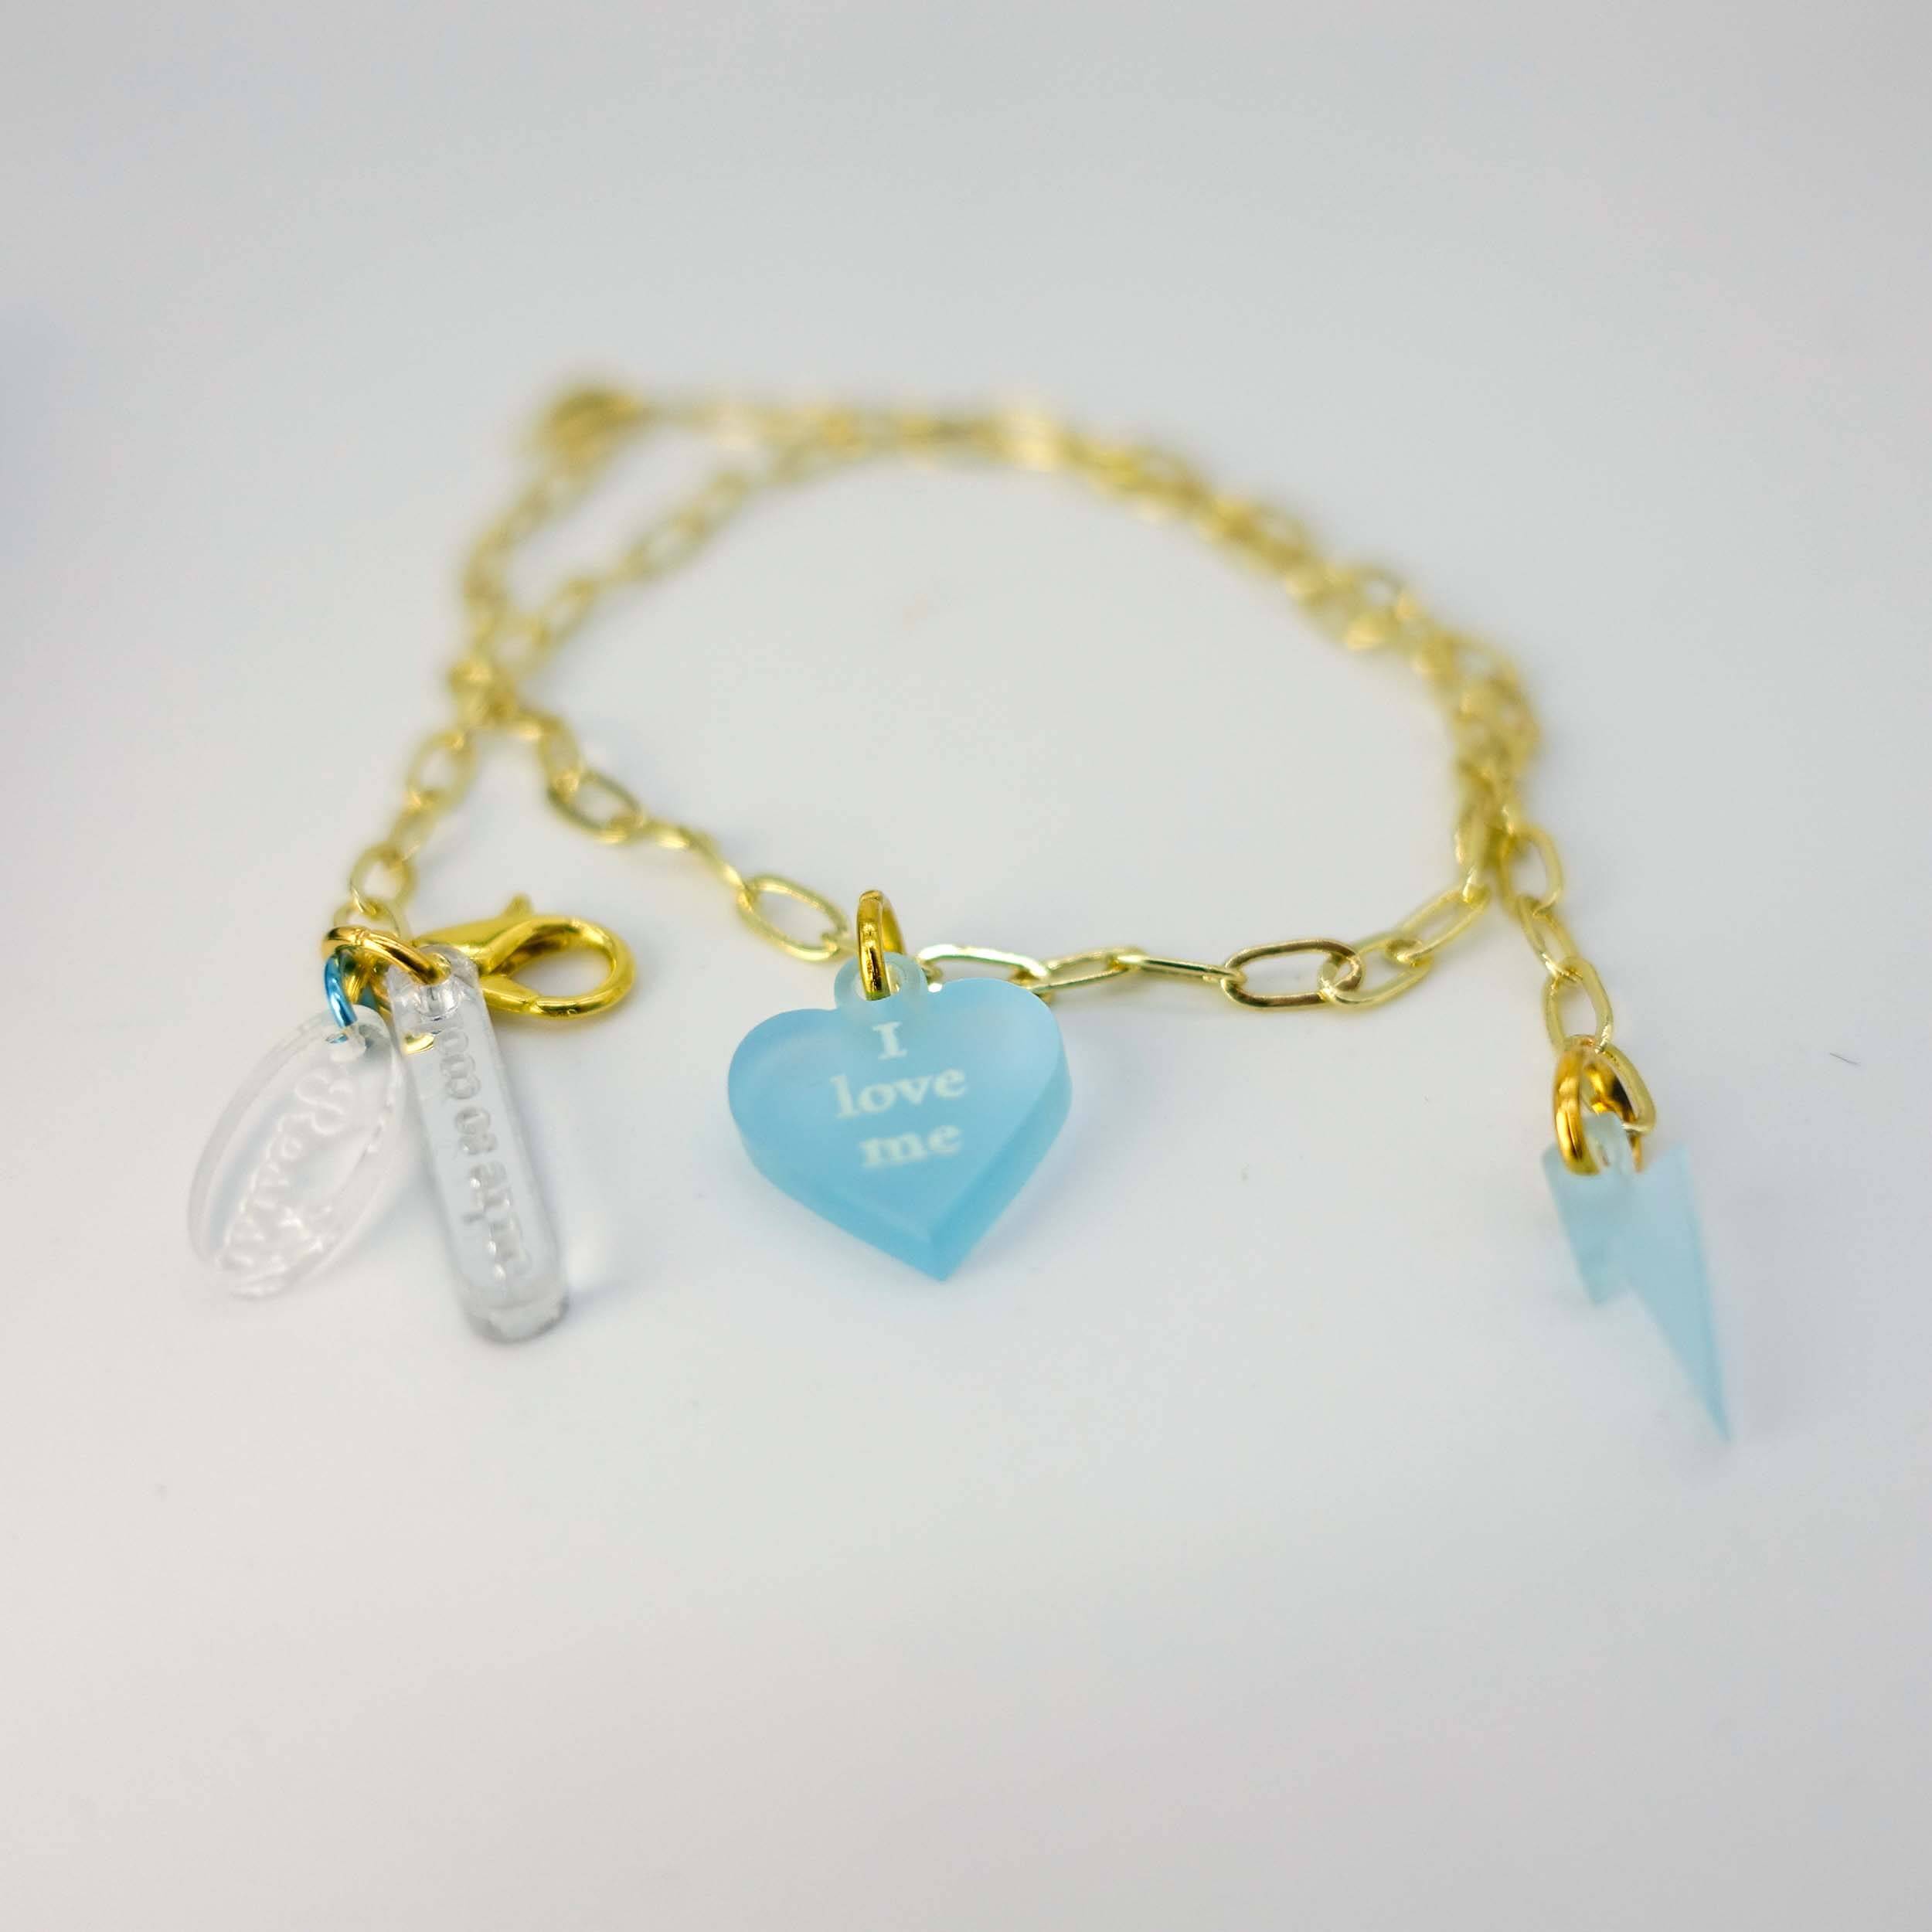 I love me glow in the dark choker and bracelet on gold delicate paperclip chain, shown on a white background. 